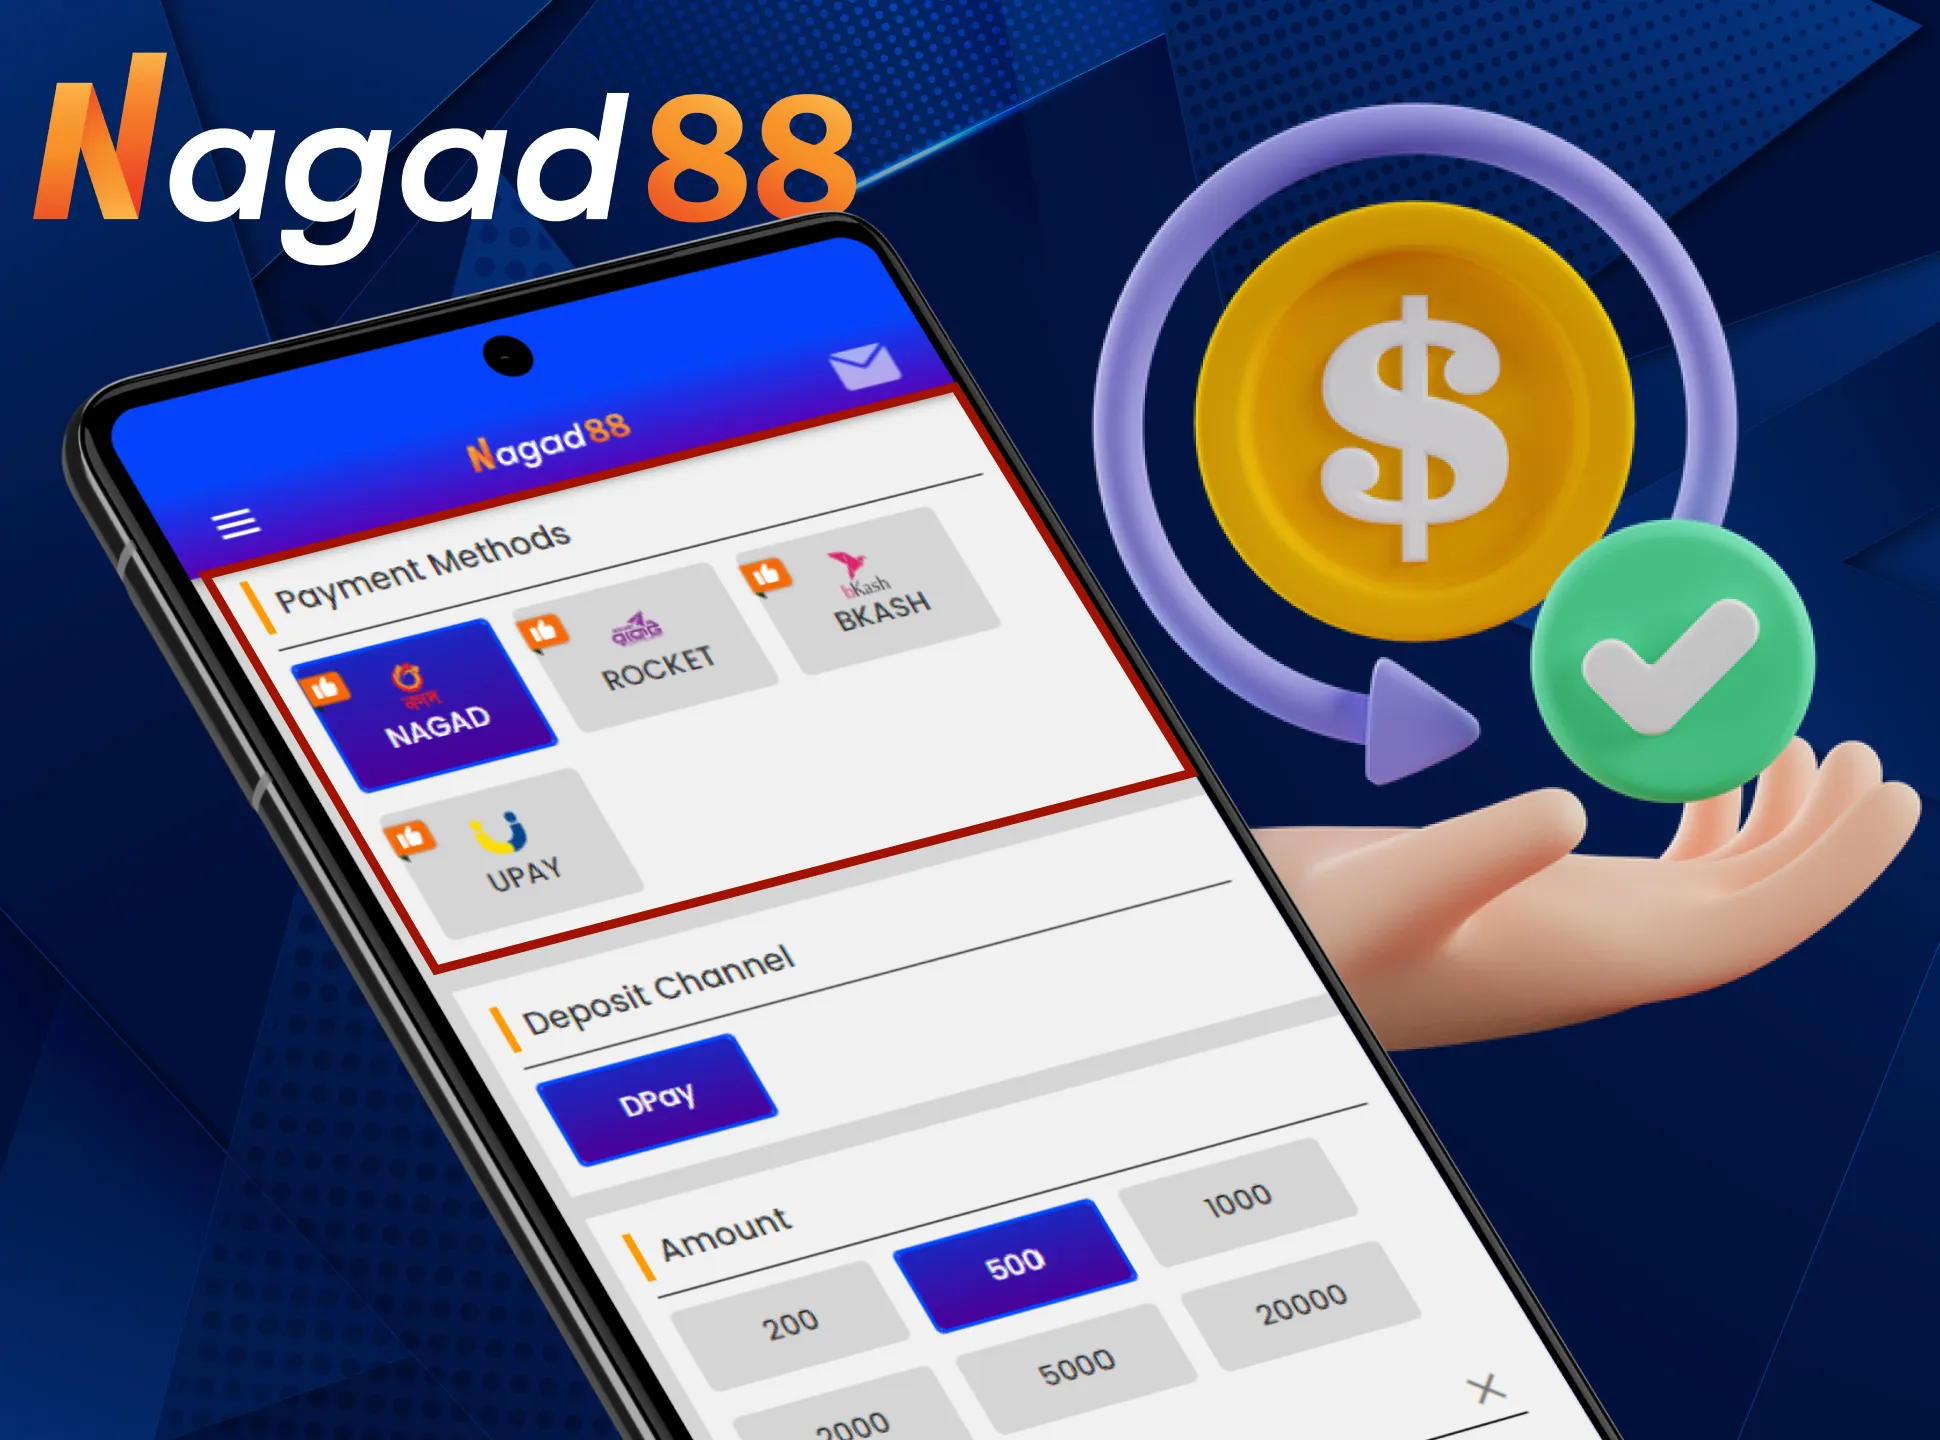 The Nagad88 app offers many ways to deposit and withdraw your winnings.